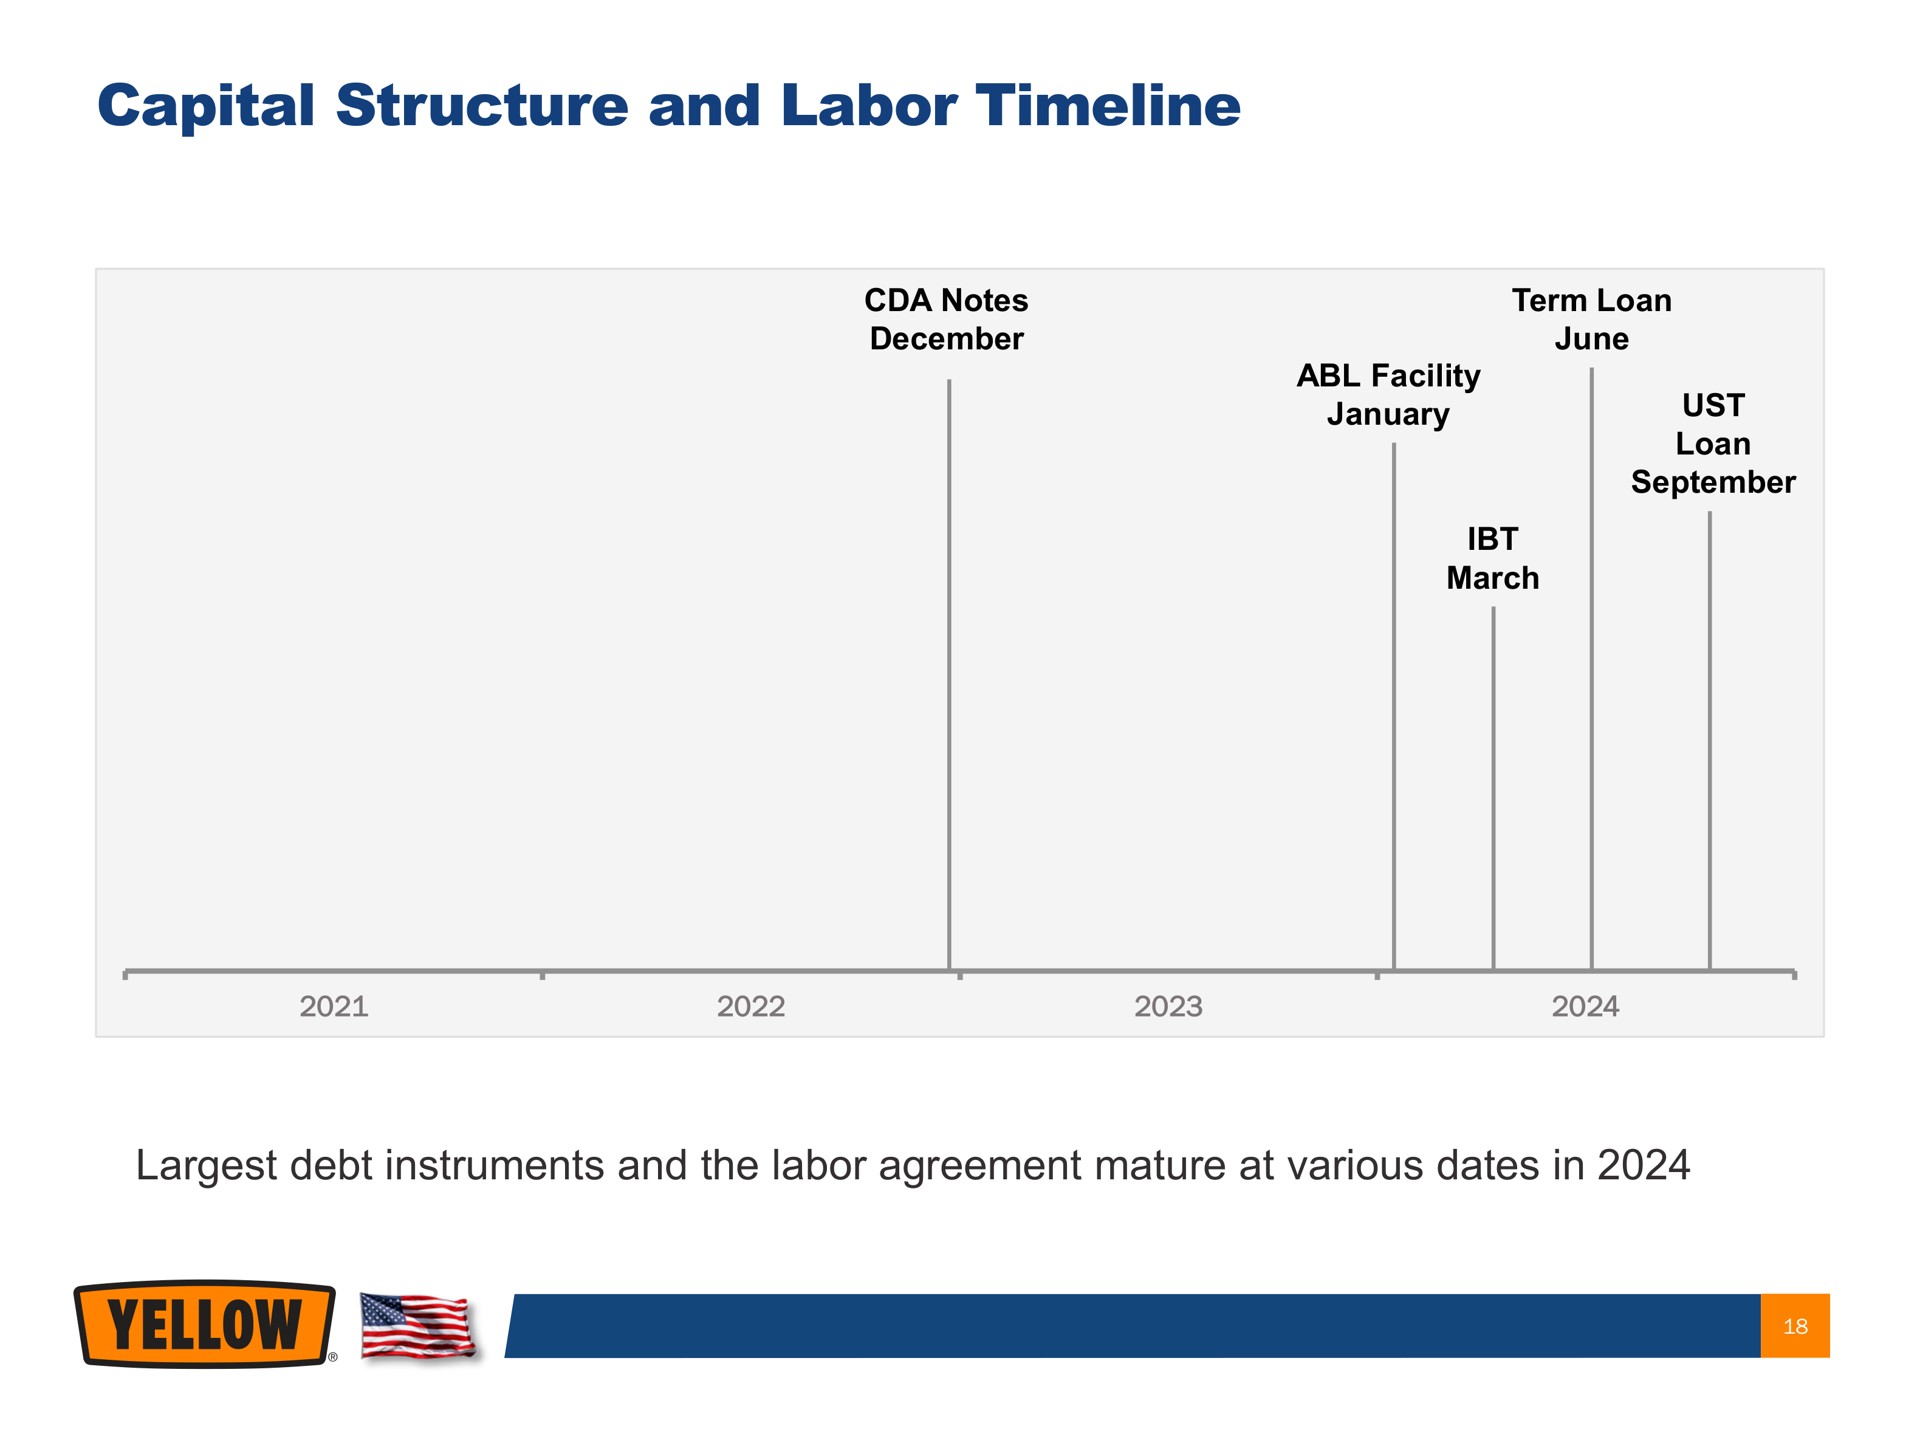 capital structure and labor debt instruments and the labor agreement mature at various dates in | Yellow Corporation